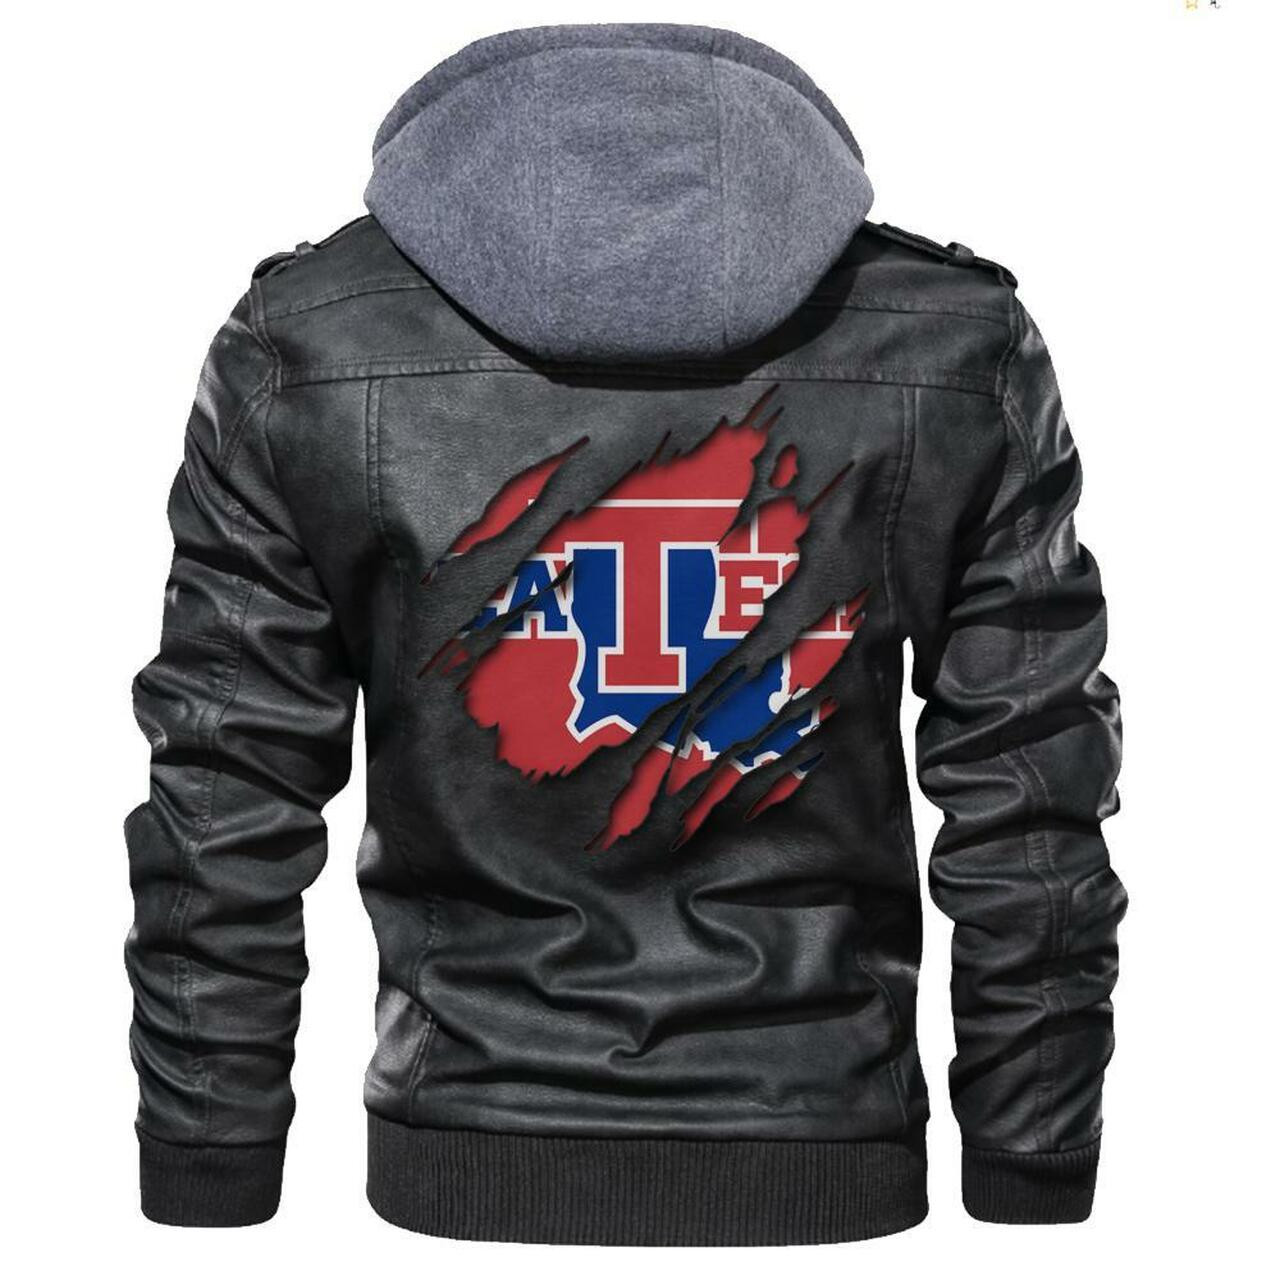 This leather Jacket will look great on you and make you stand out from the crowd 265